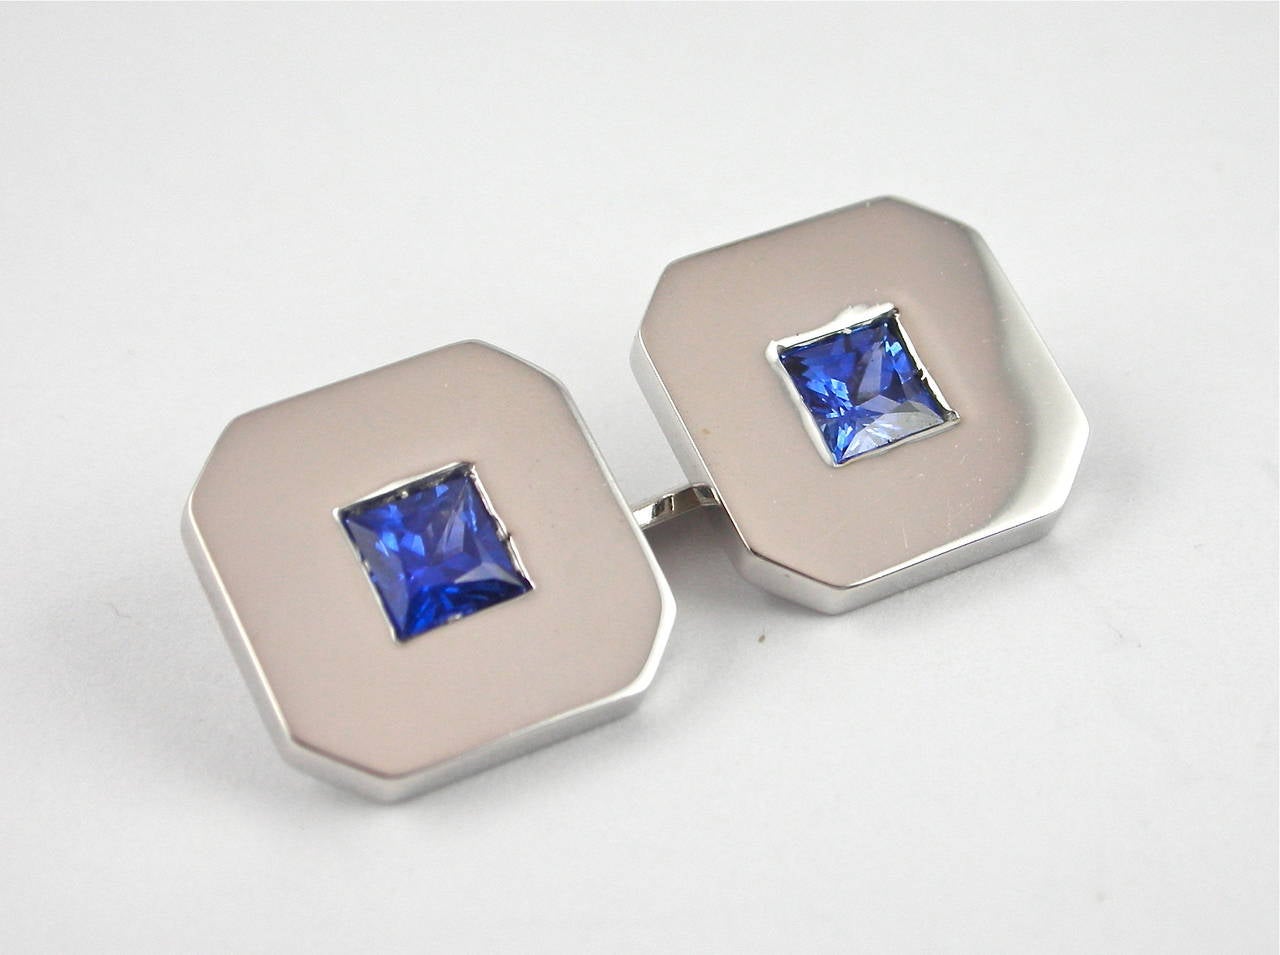 Jona design collection, 18 karat white gold cufflinks set with square cut blue sapphires weighing 0.58 carats. Hand made in Italy, stamped Jona.
Measurements: 12.58 x 12.58mm
All Jona jewelry is new and has never been previously owned or worn. Each